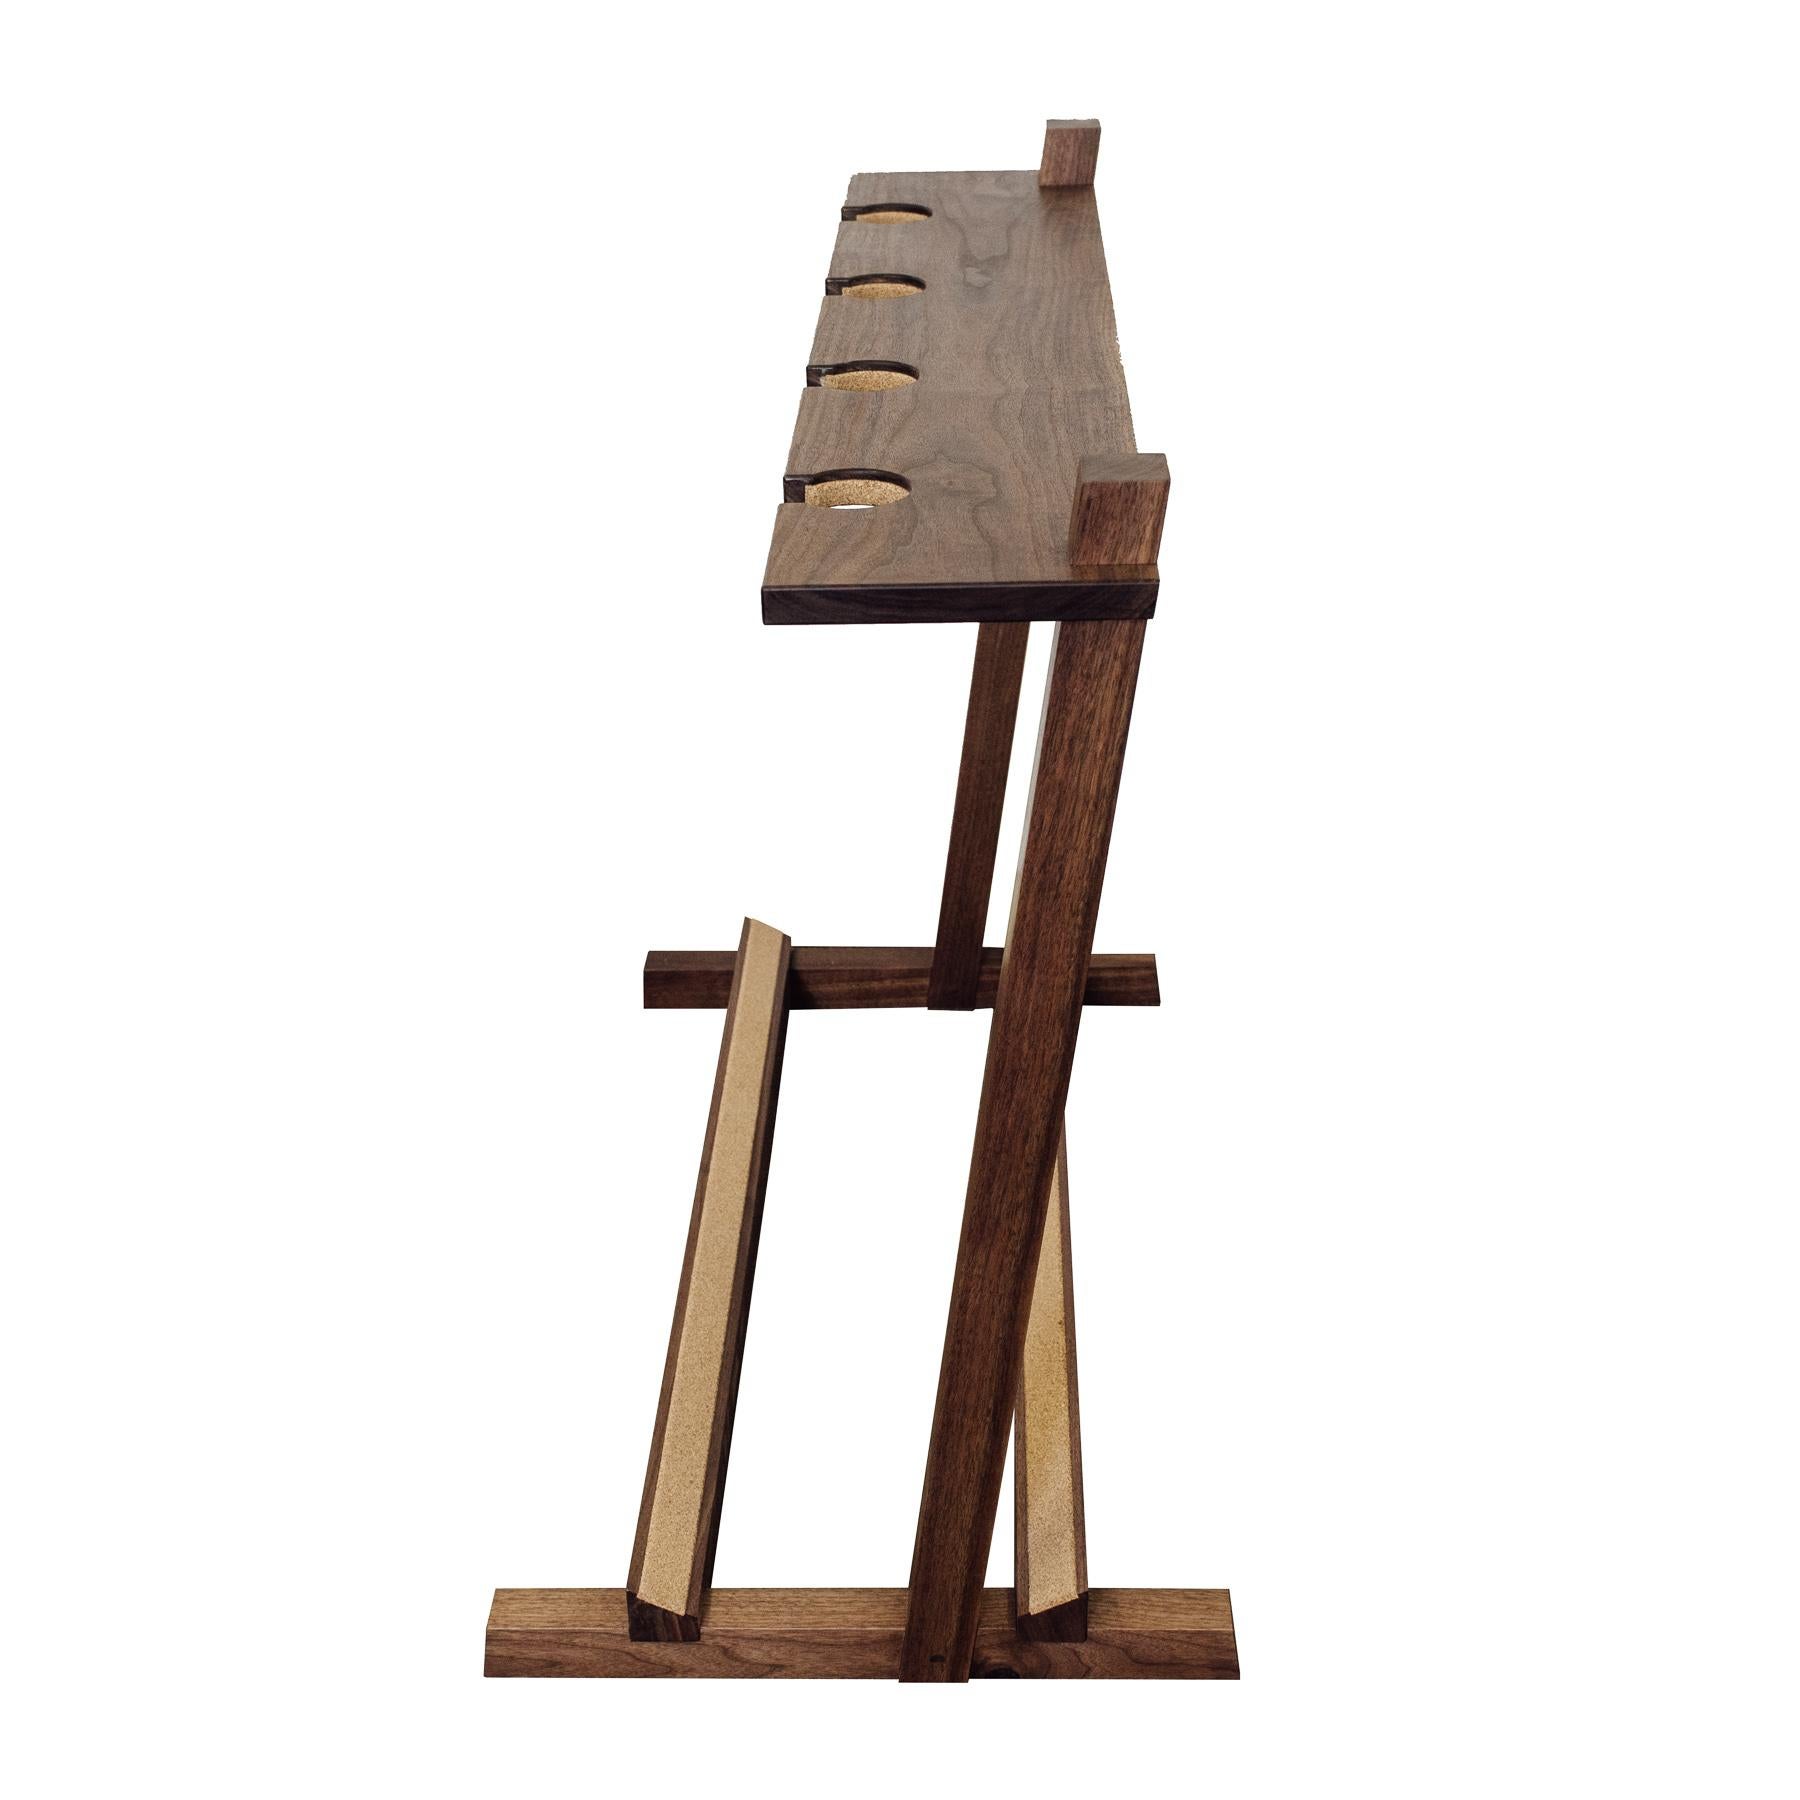 The Olin is a handcrafted wooden guitar floor stand and instrument display. Utilizing American hardwoods and traditional joinery, this stand allows you to keep your instruments at hand without sacrificing design. Graceful in proportion, the Olin